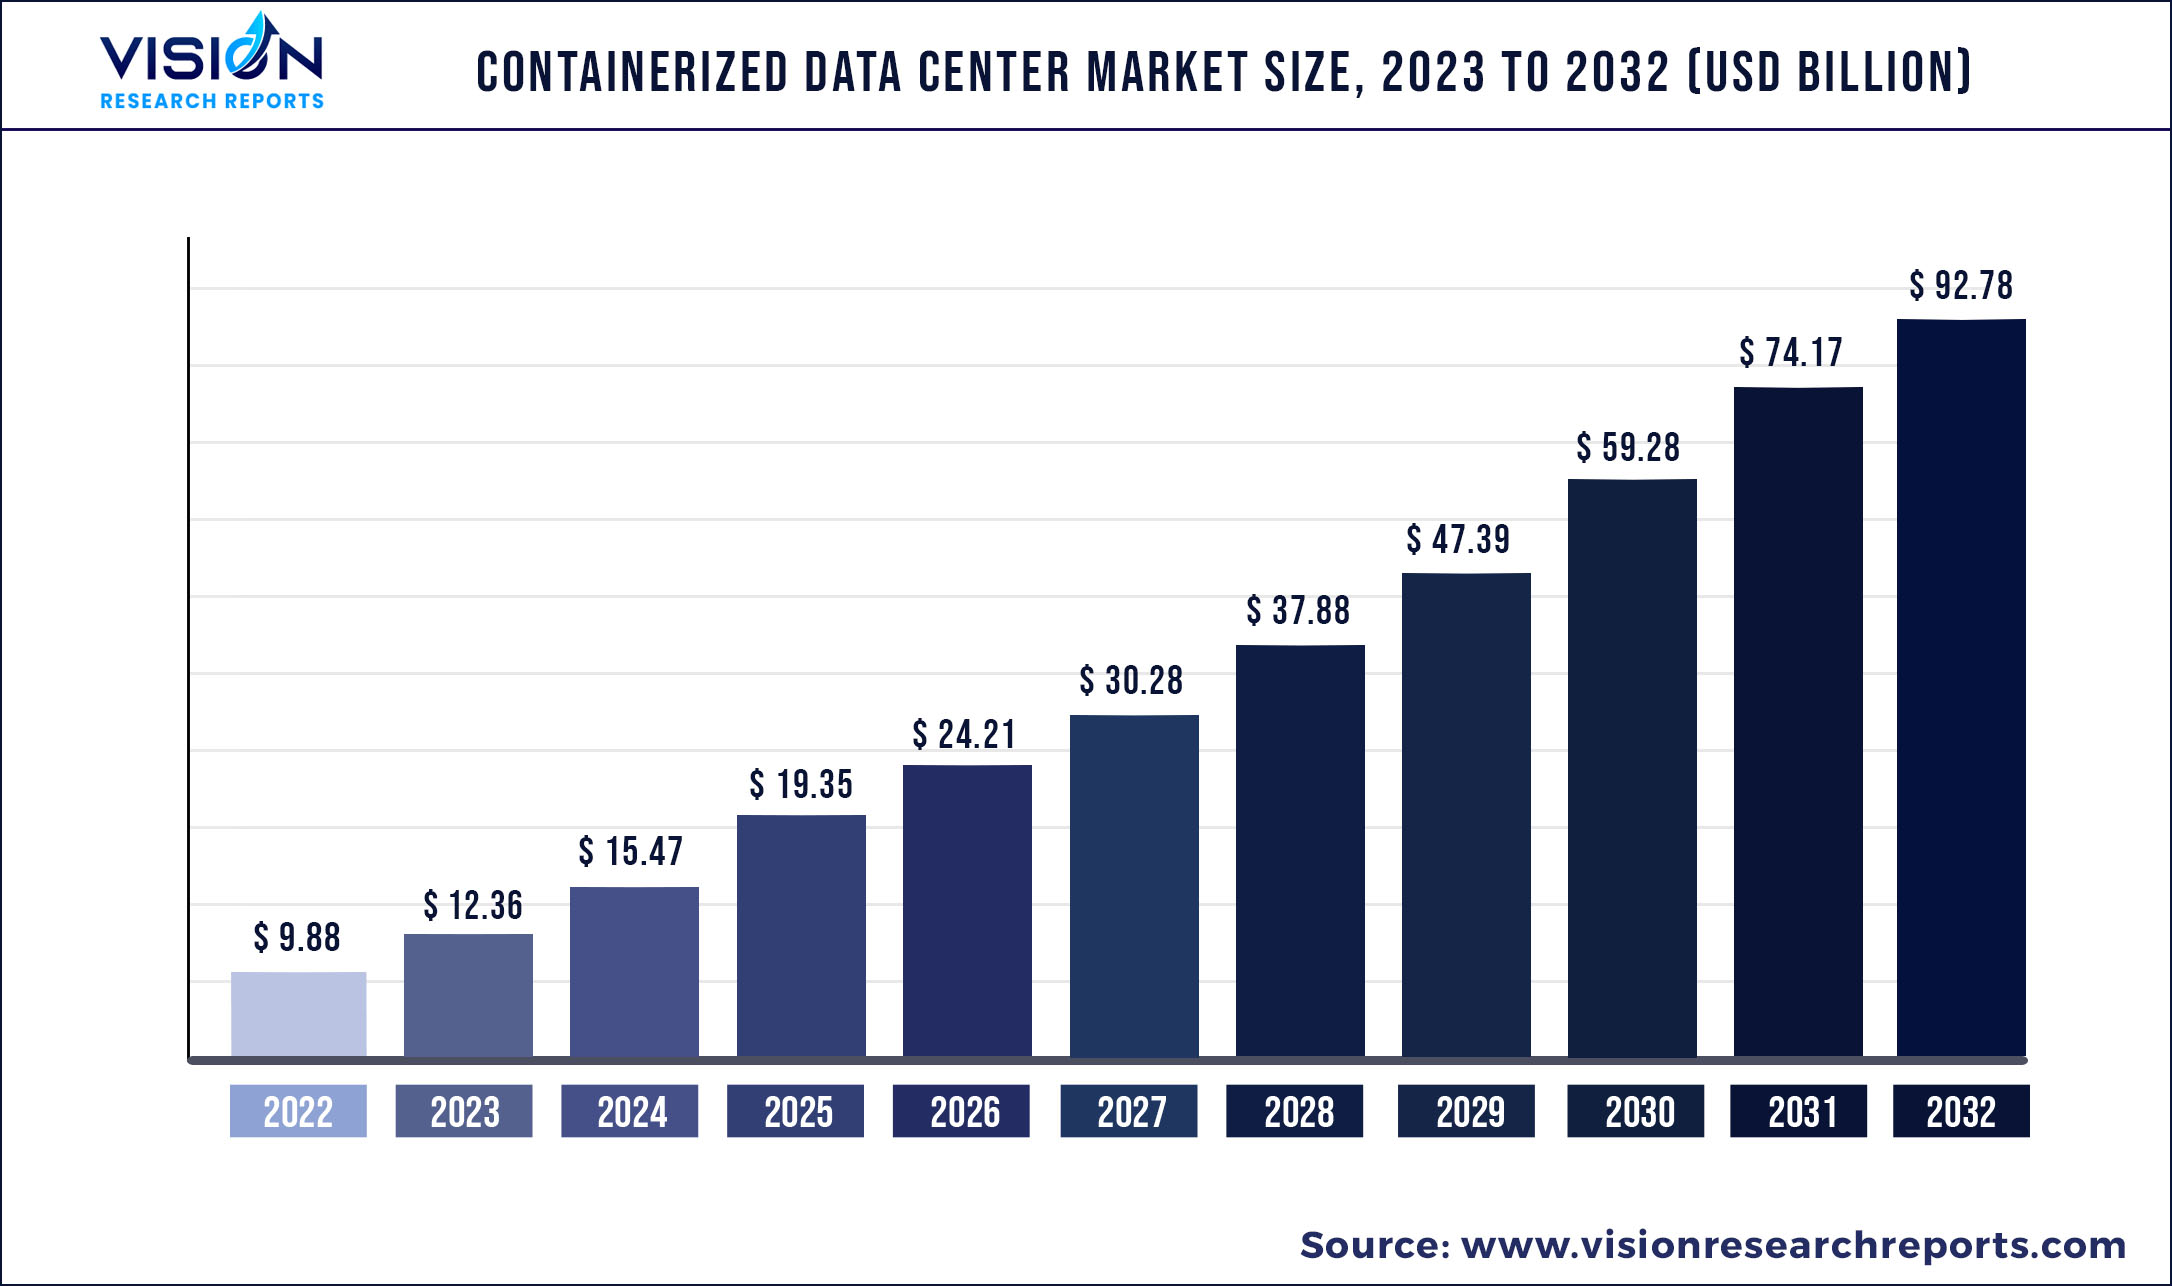 Containerized Data Center Market Size 2023 to 2032